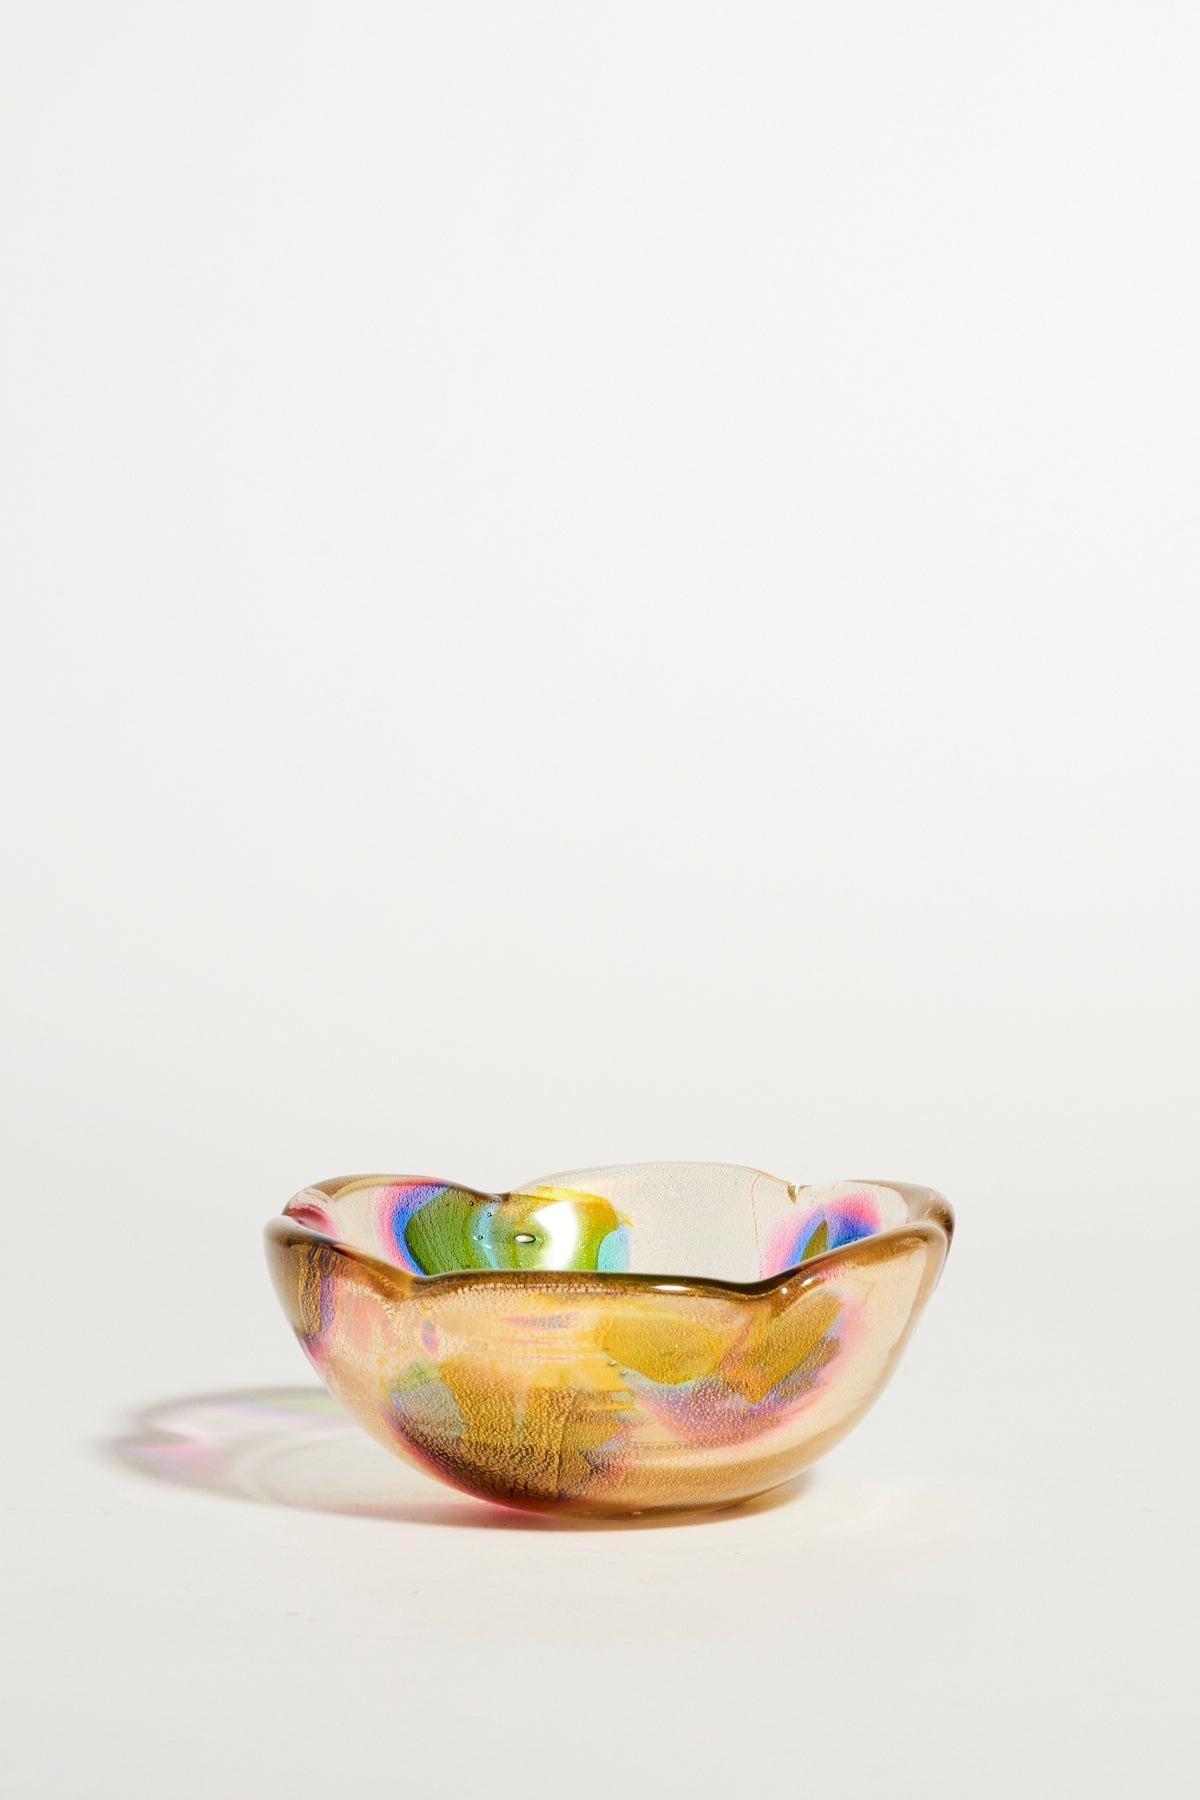 Beautiful Murano macchie bowl with petal shaped rim, abstract molten patterns in pink, violet, lilac, blue, amber and green overlaid with shimmering gold dust. Part of a collection stored in drawers, pristine condition.